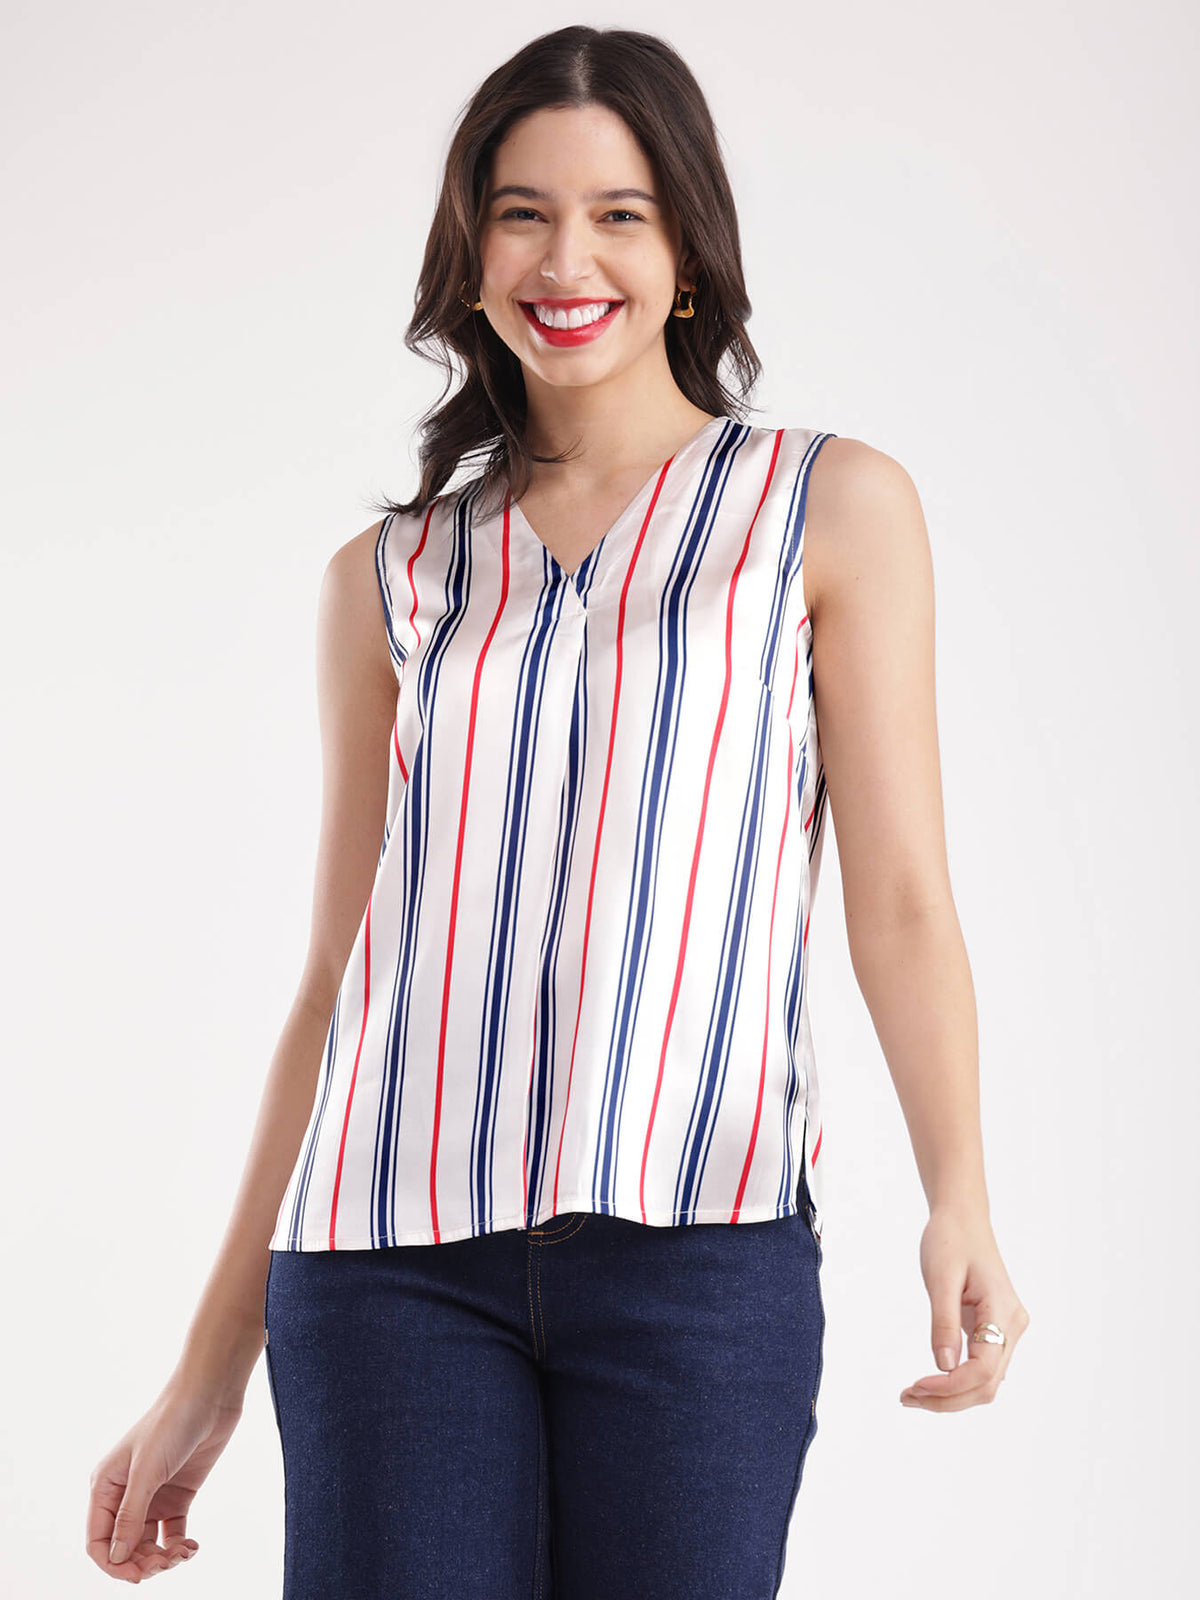 Satin Striped Top - White And Blue